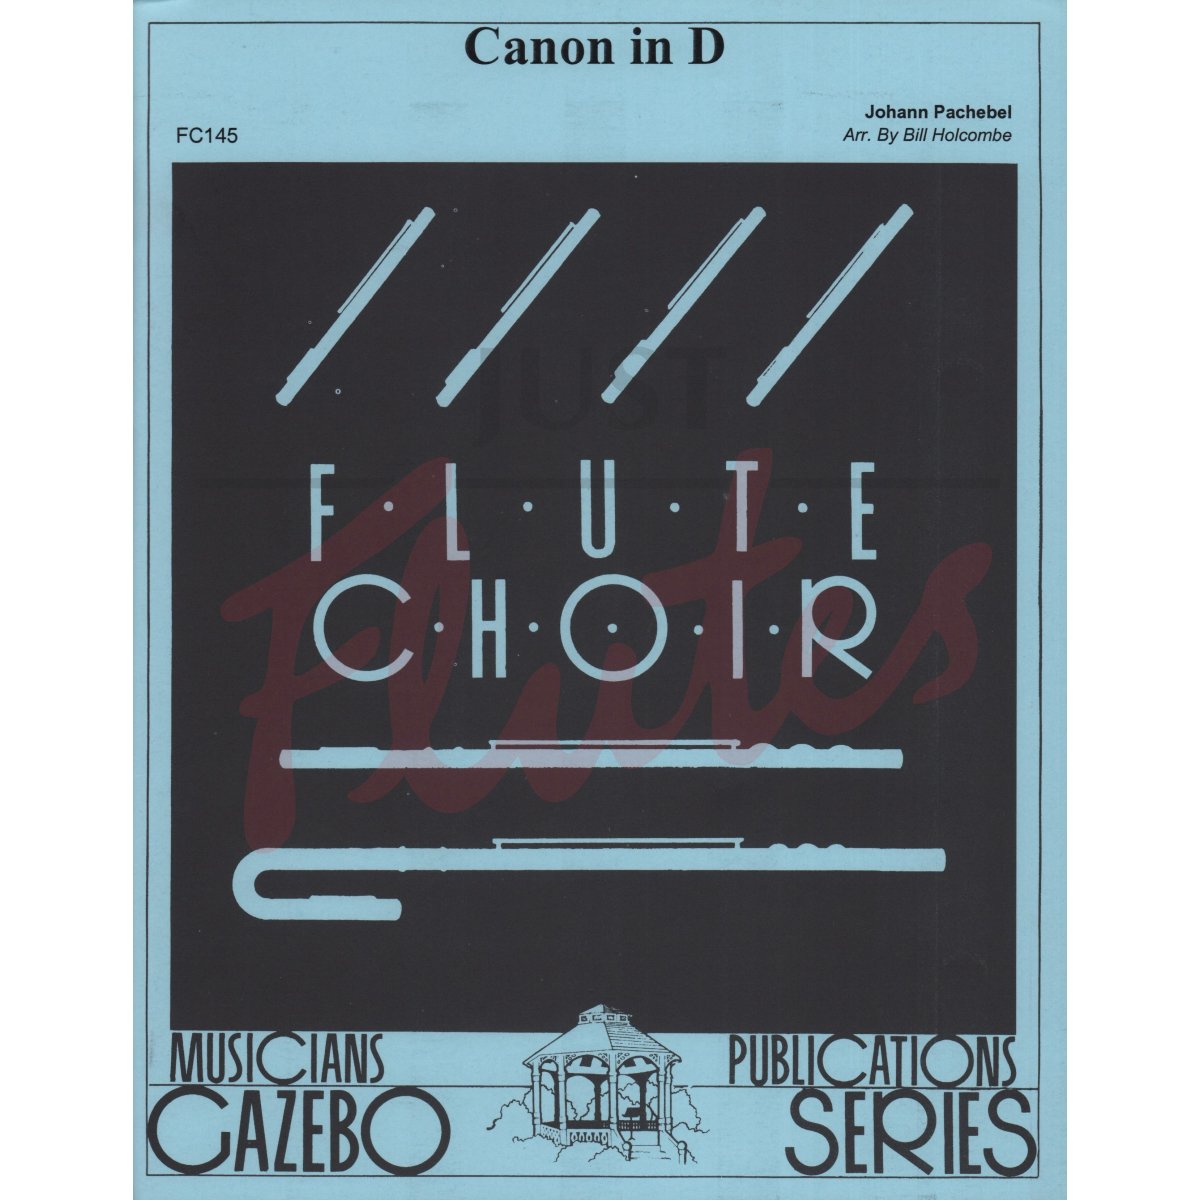 Canon in D for Flute Choir